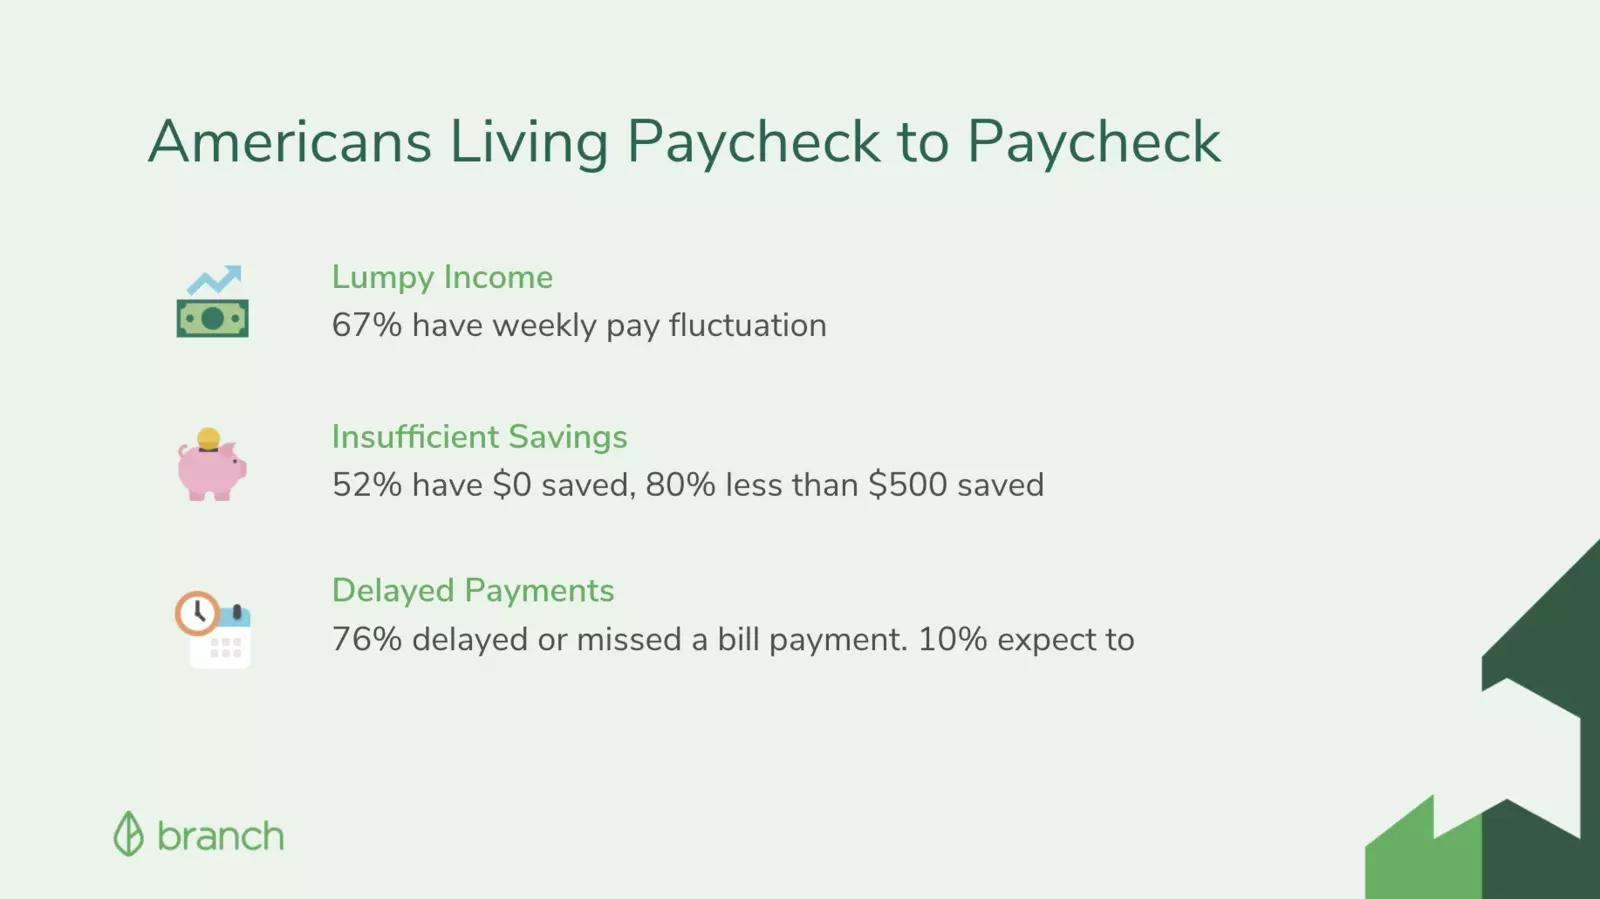 Americans Living Paycheck to Paycheck